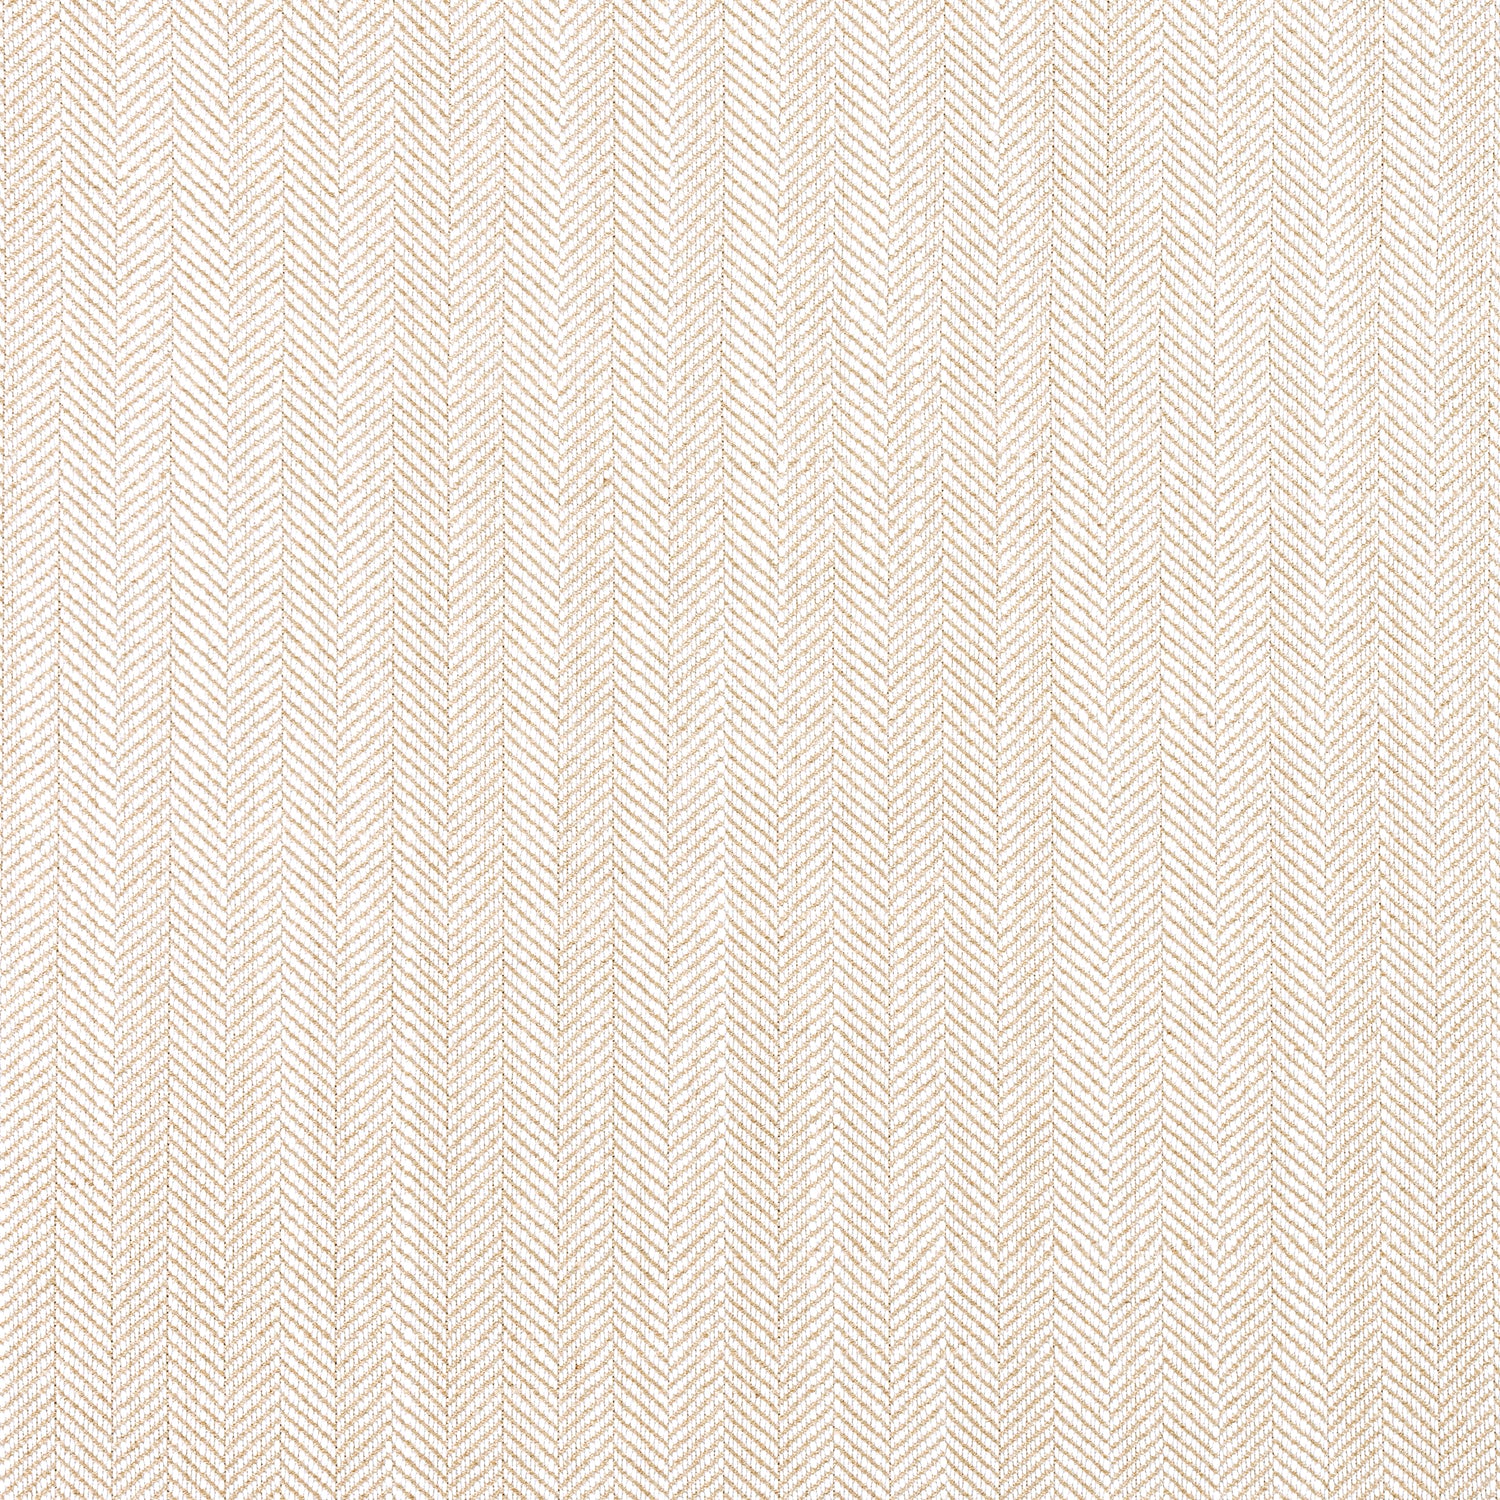 Savile fabric in sand color - pattern number W8559 - by Thibaut in the Villa Textures collection